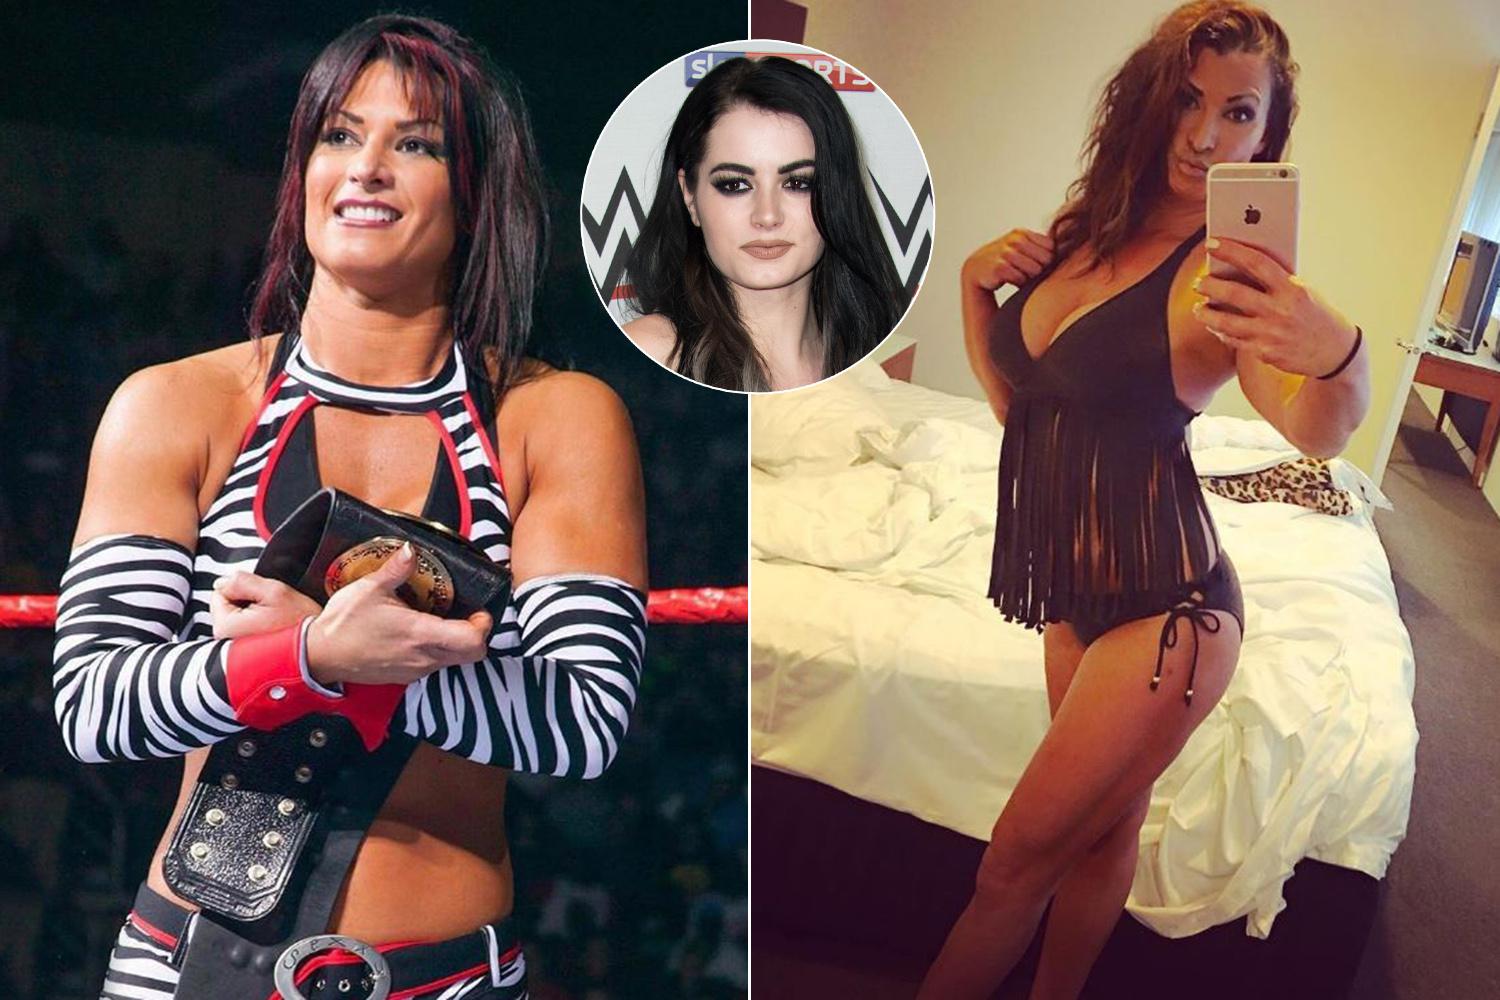 ching vergara recommends Wwe Divas Sex Tapes